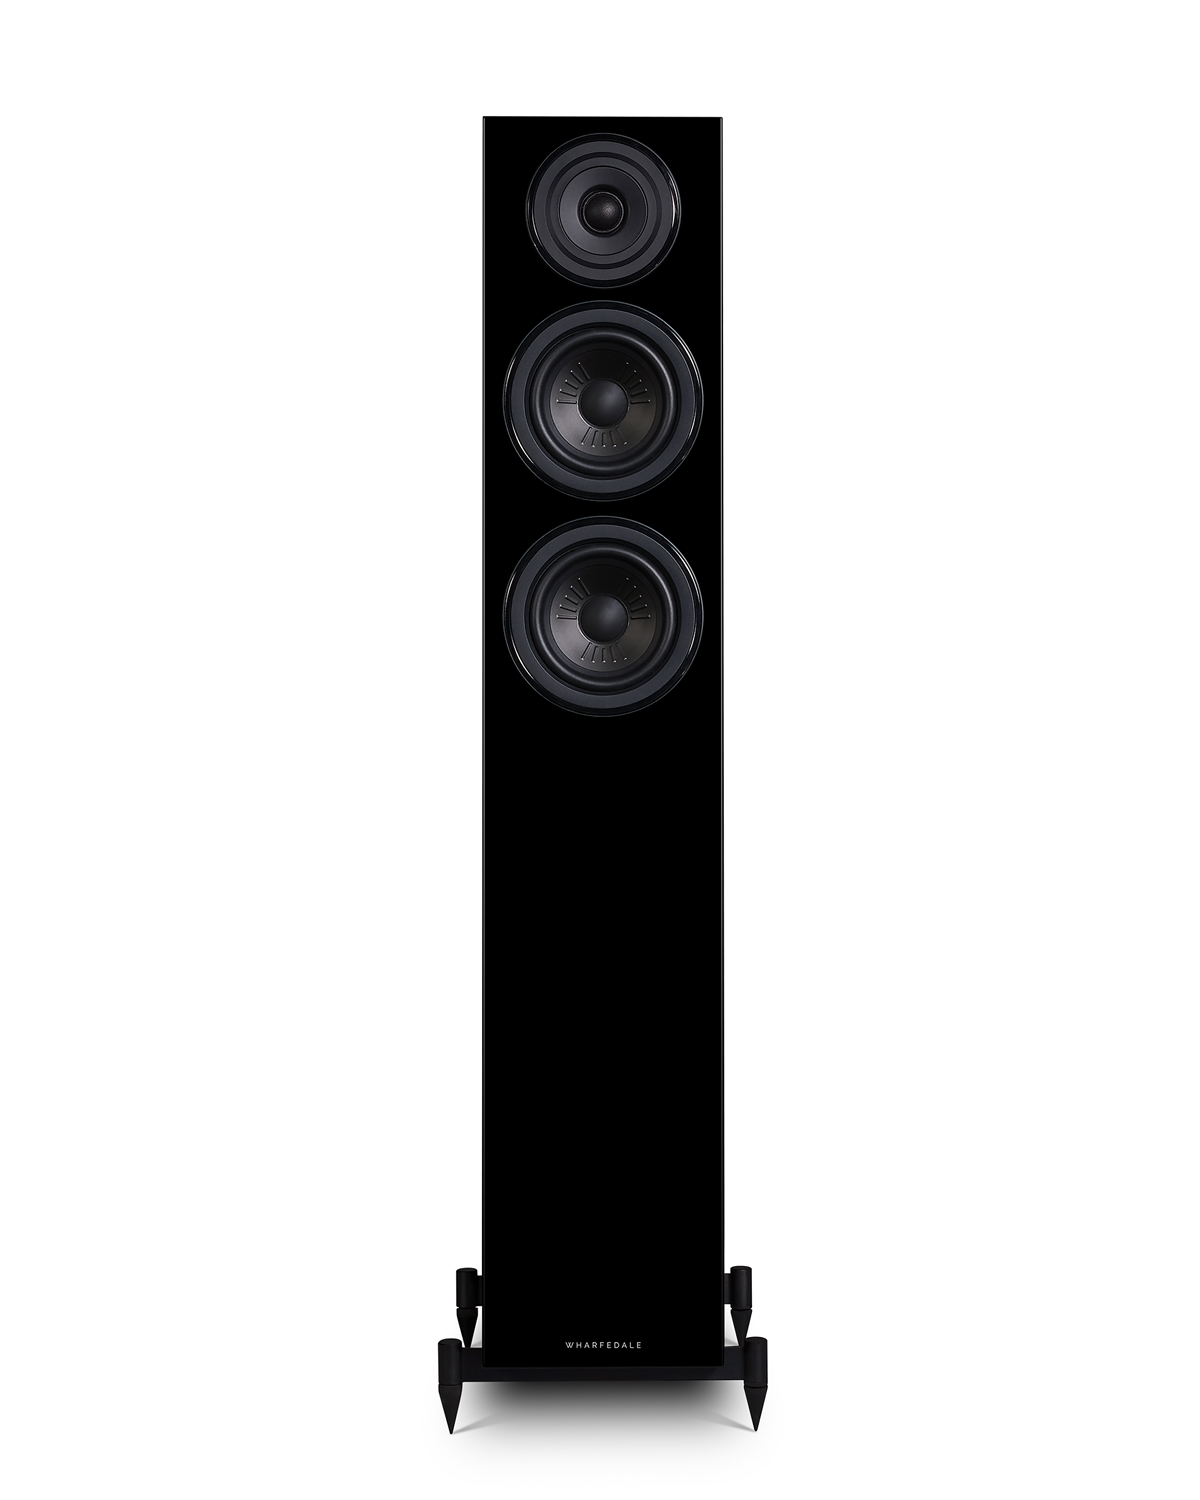 The powerhouse model of the Wharfedale DIAMOND 12 series, the DIAMOND 12.4 is the room-filling, chest-pounding, largest model in the series. For larger, more powerful systems and cinema-style home theatre experiences, the DIAMOND 12.4 will fill your room with an impactful, immersive performance.